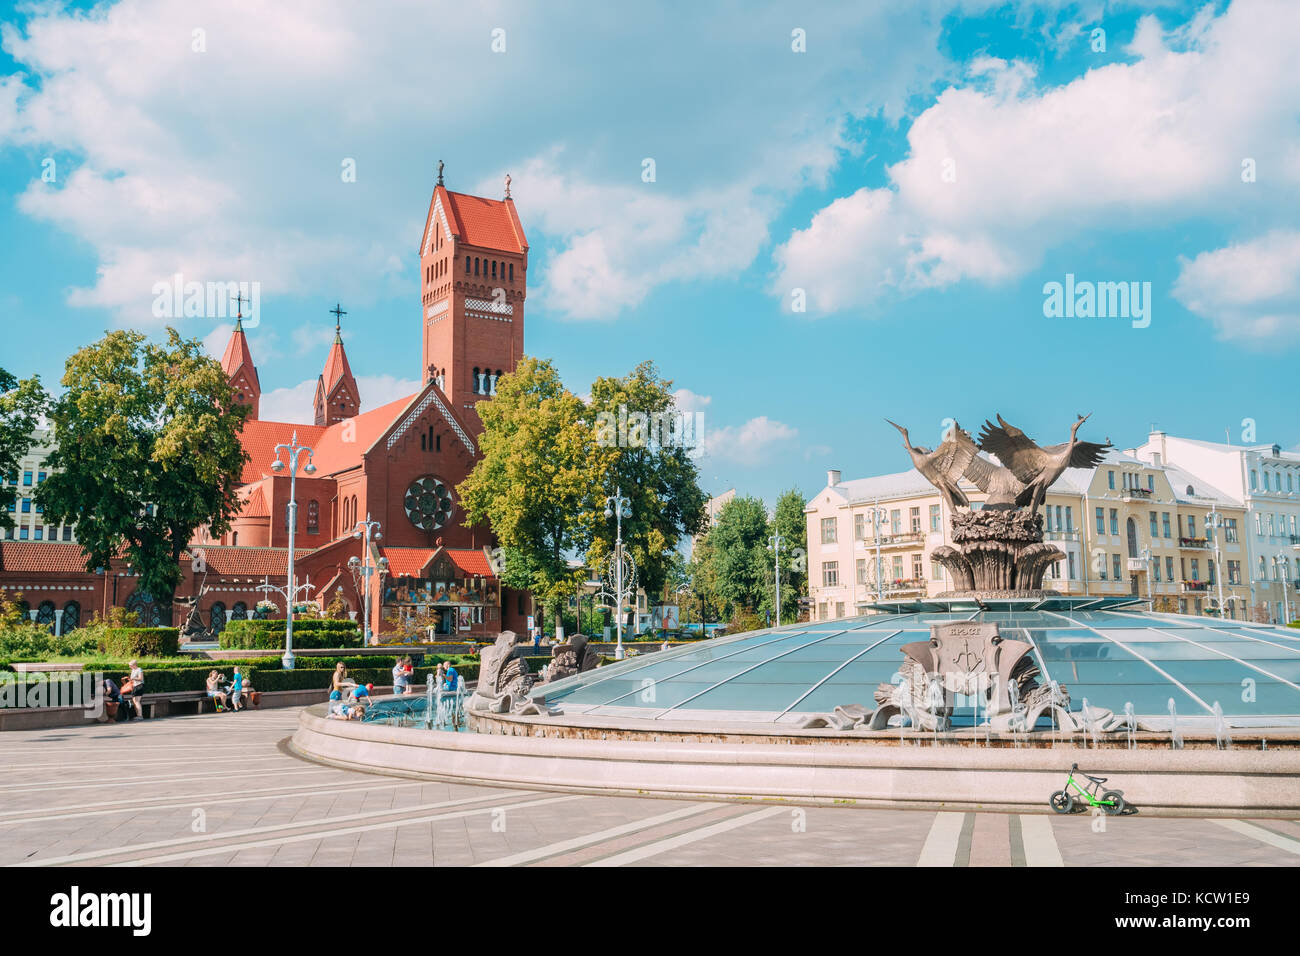 Minsk, Belarus. The Independence Square With Glass Dome Of Stolica Stolitsa, Underground Shopping Center And View Of Roman Catholic Red Church Of Sain Stock Photo